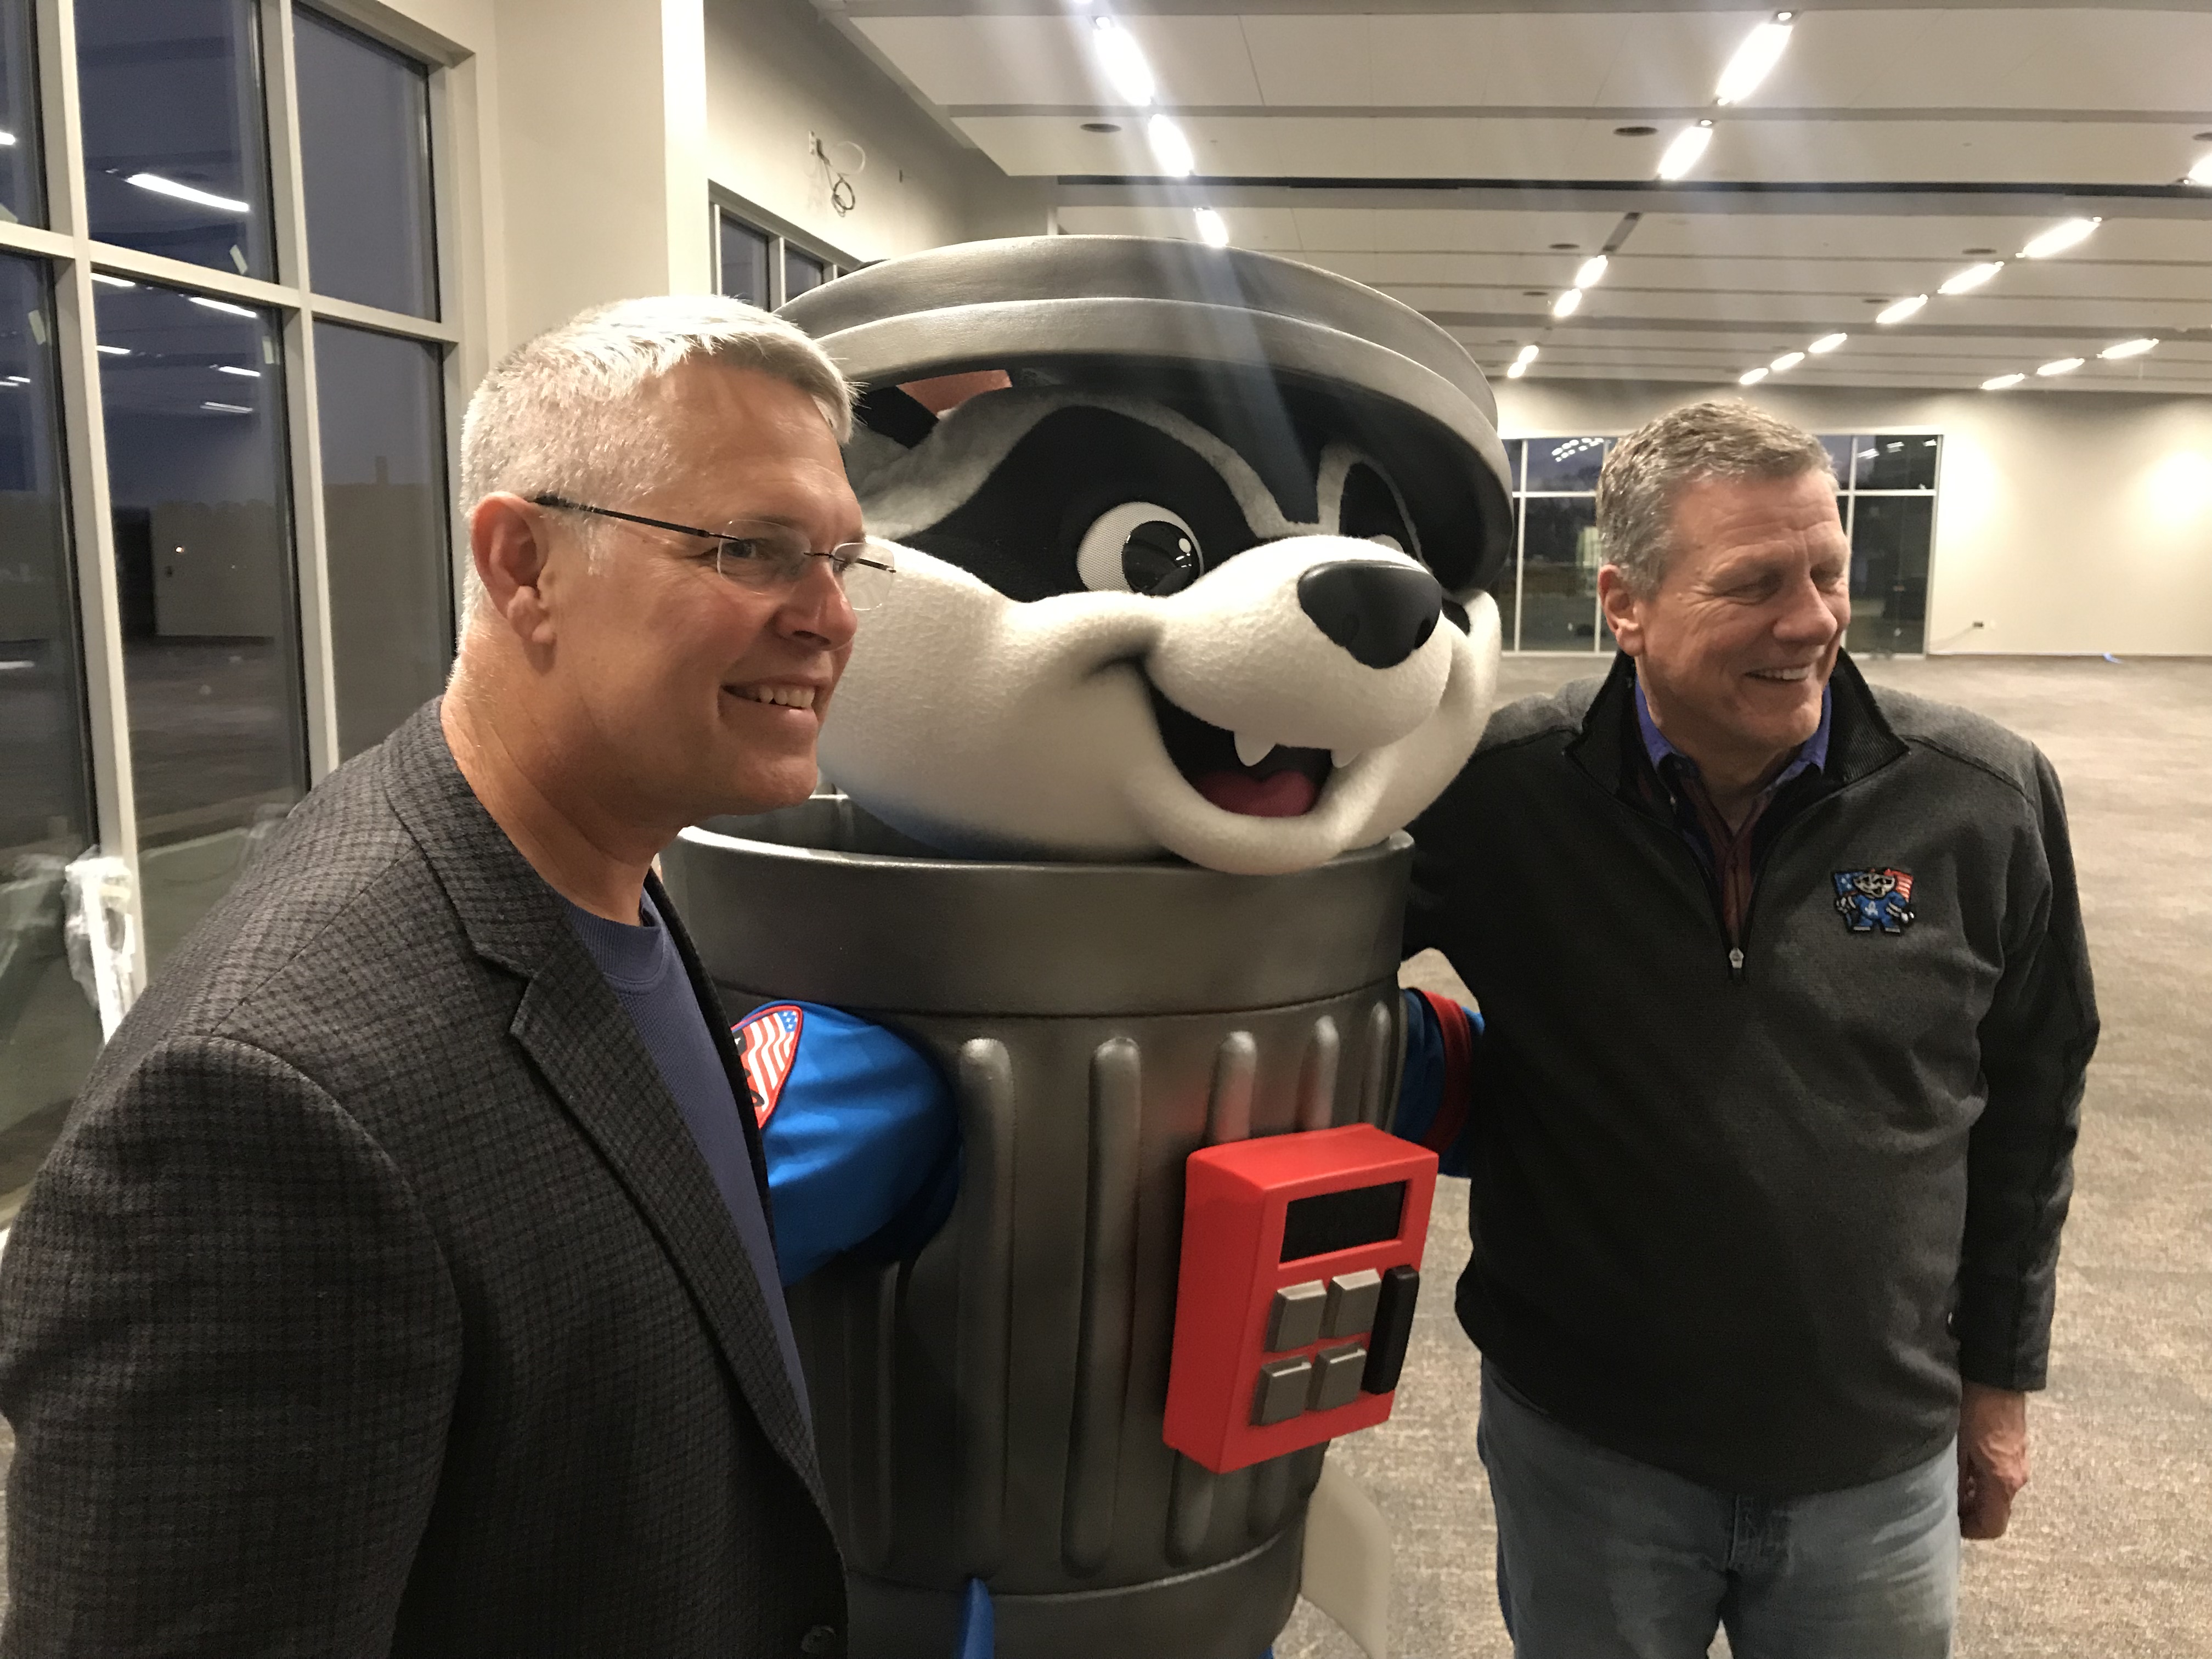 Jay Bell, new manager of Trash Pandas, is artist's latest